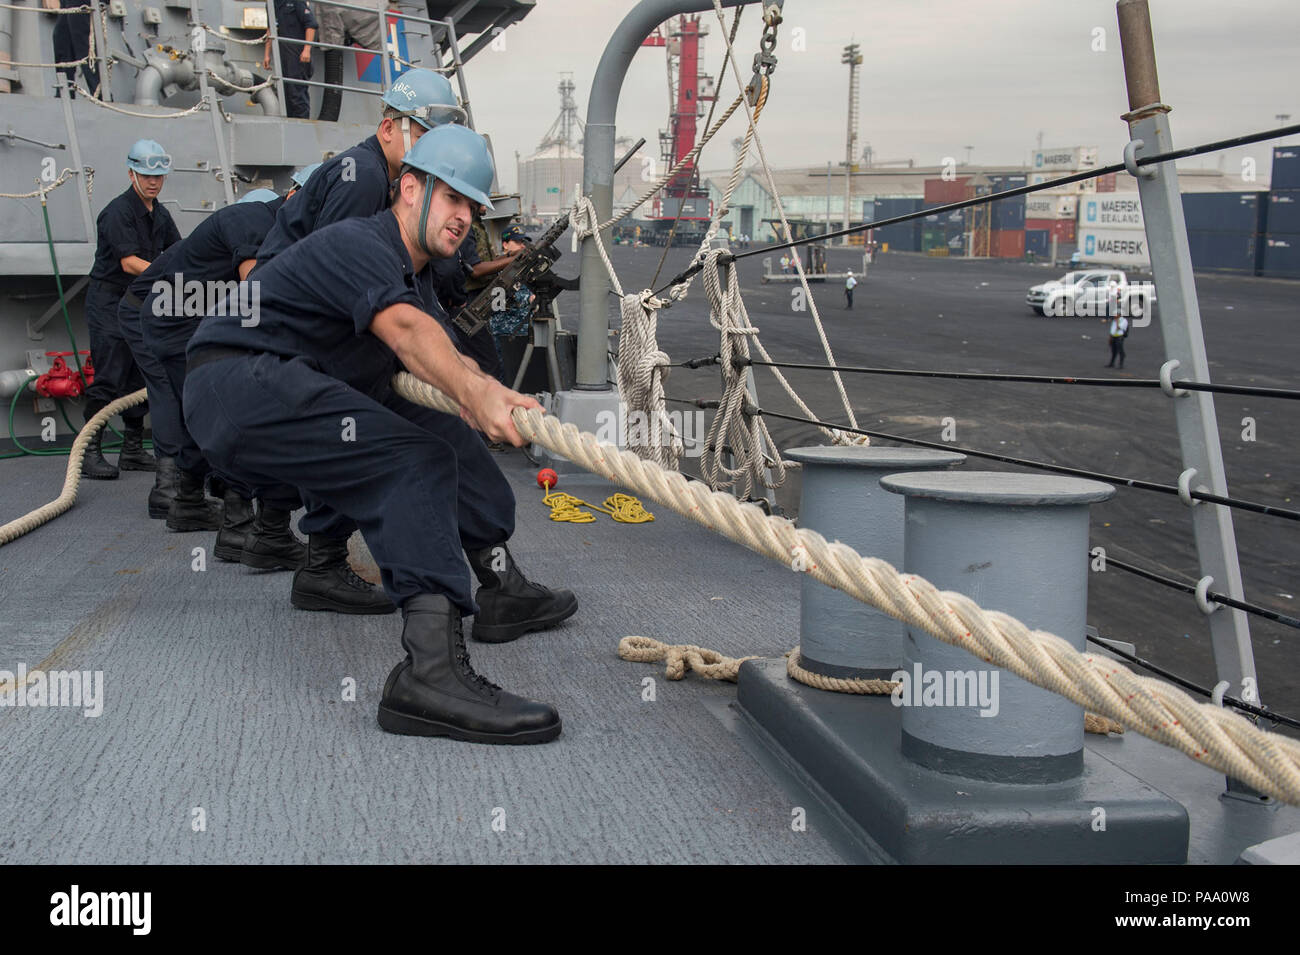 160304-N-MD297-028 PUERTO QUETZAL, Guatemala (March 4, 2016) - Sailors assigned to the Arleigh Burke-class guided-missile destroyer USS Lassen (DDG 82) heave a mooring line during a brief stop for fuel (BSF) in Puerto Quetzal, Guatemala. Lassen is deployed to the U.S. 4th Fleet area of responsibility supporting law enforcement operations as part of Operation Martillo. (U.S. Navy photo by Mass Communication Specialist 2nd Class Huey D. Younger Jr./Released) Stock Photo